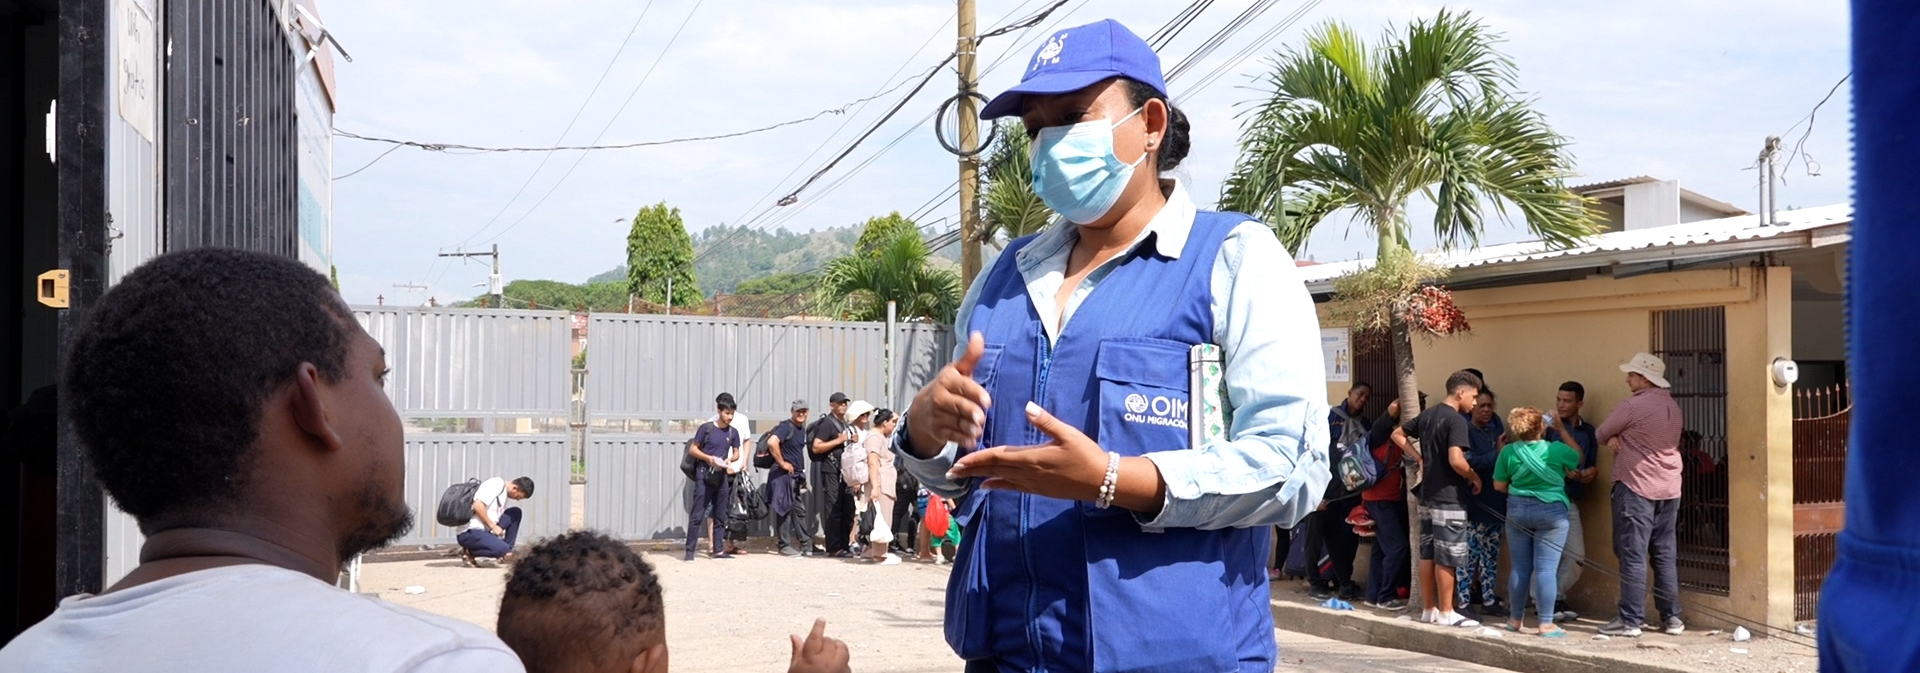 IOM staff providing information about shelters available to migrant families in transit in Honduras © IOM Honduras / E. Escoto 2023